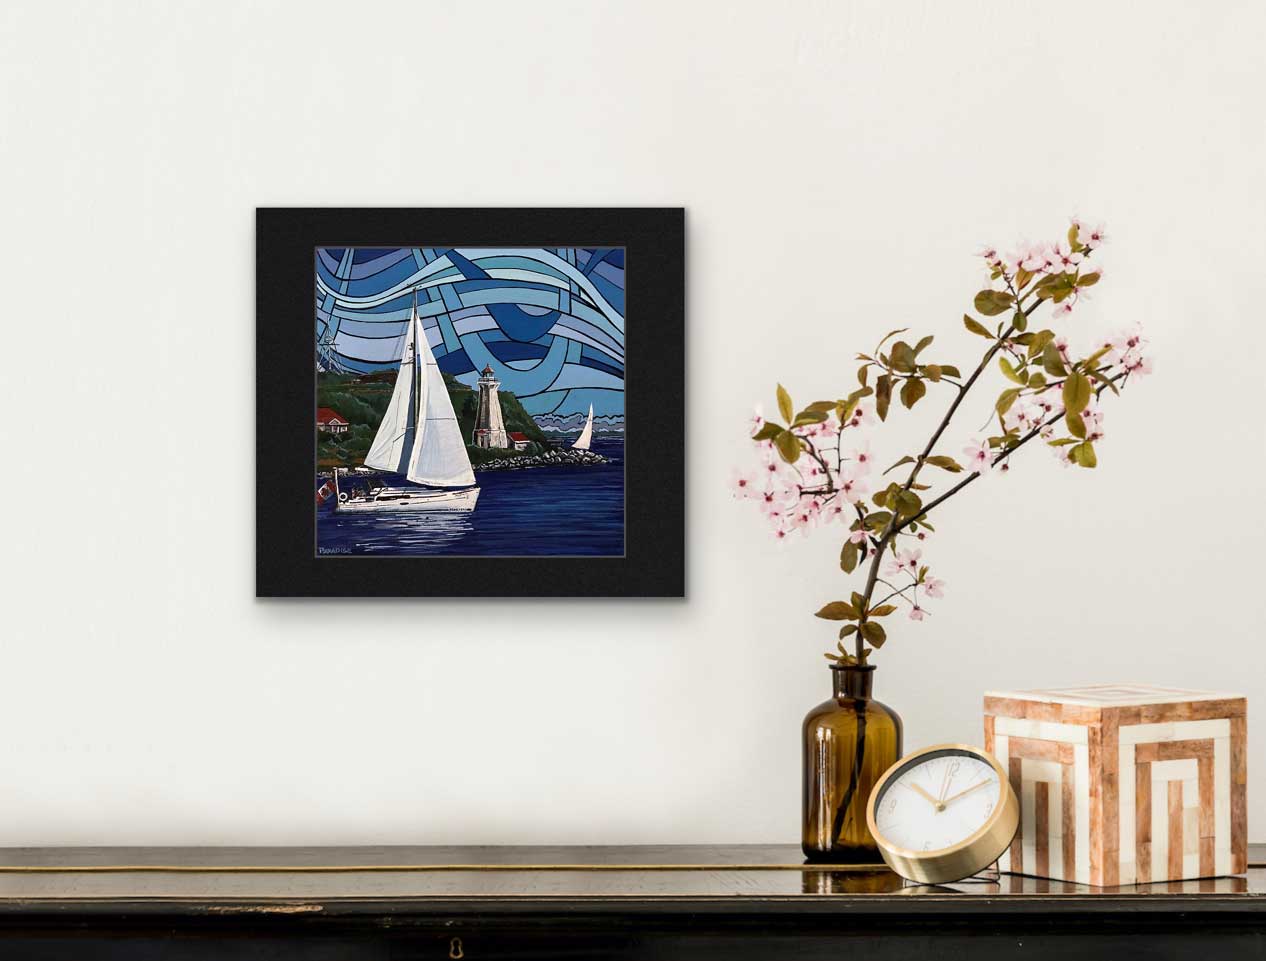 Elegant sailing boat cruising in the waters off Halifax Harbour Nova Scotia, while passing in front of Georges Island Lighthouse under a vibrant blue sky. High quality print from an Original painting by a professional Canadian landscape artist. visual art ready to hang on your wall.